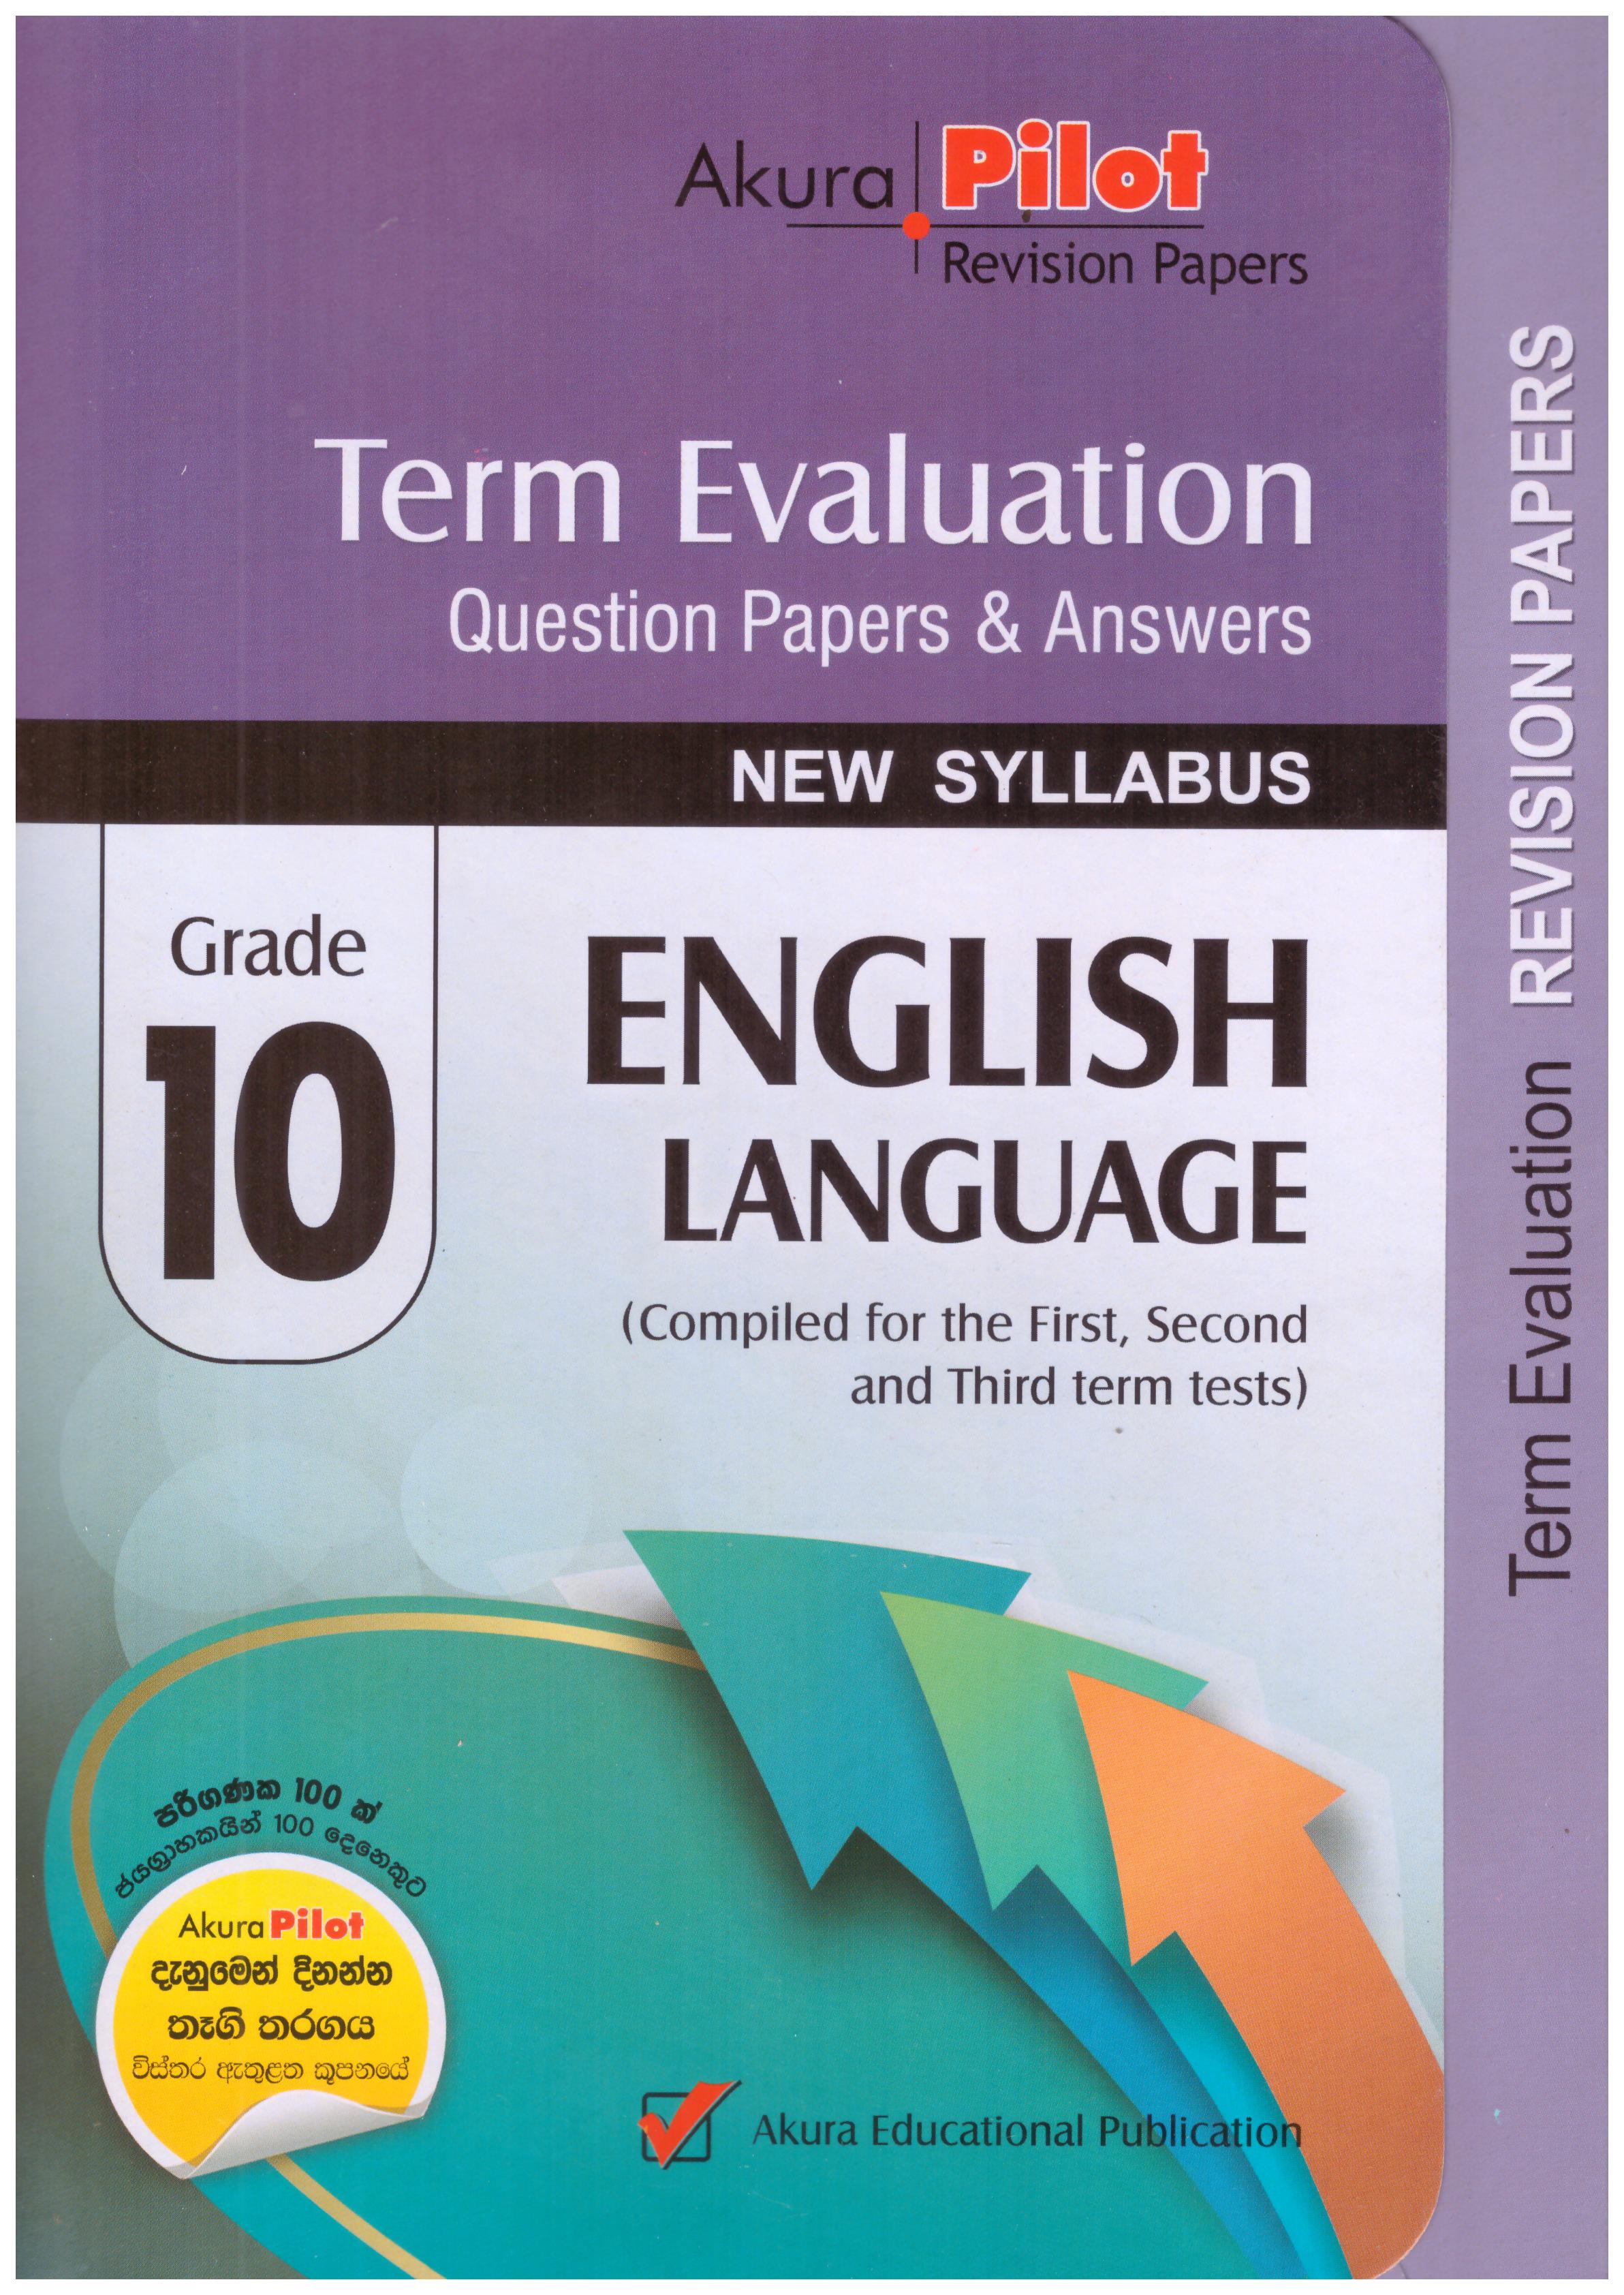 Akura Pilot Grade 10 English Language : Term Evaluation Question Papers and Answers (New Syllabus)